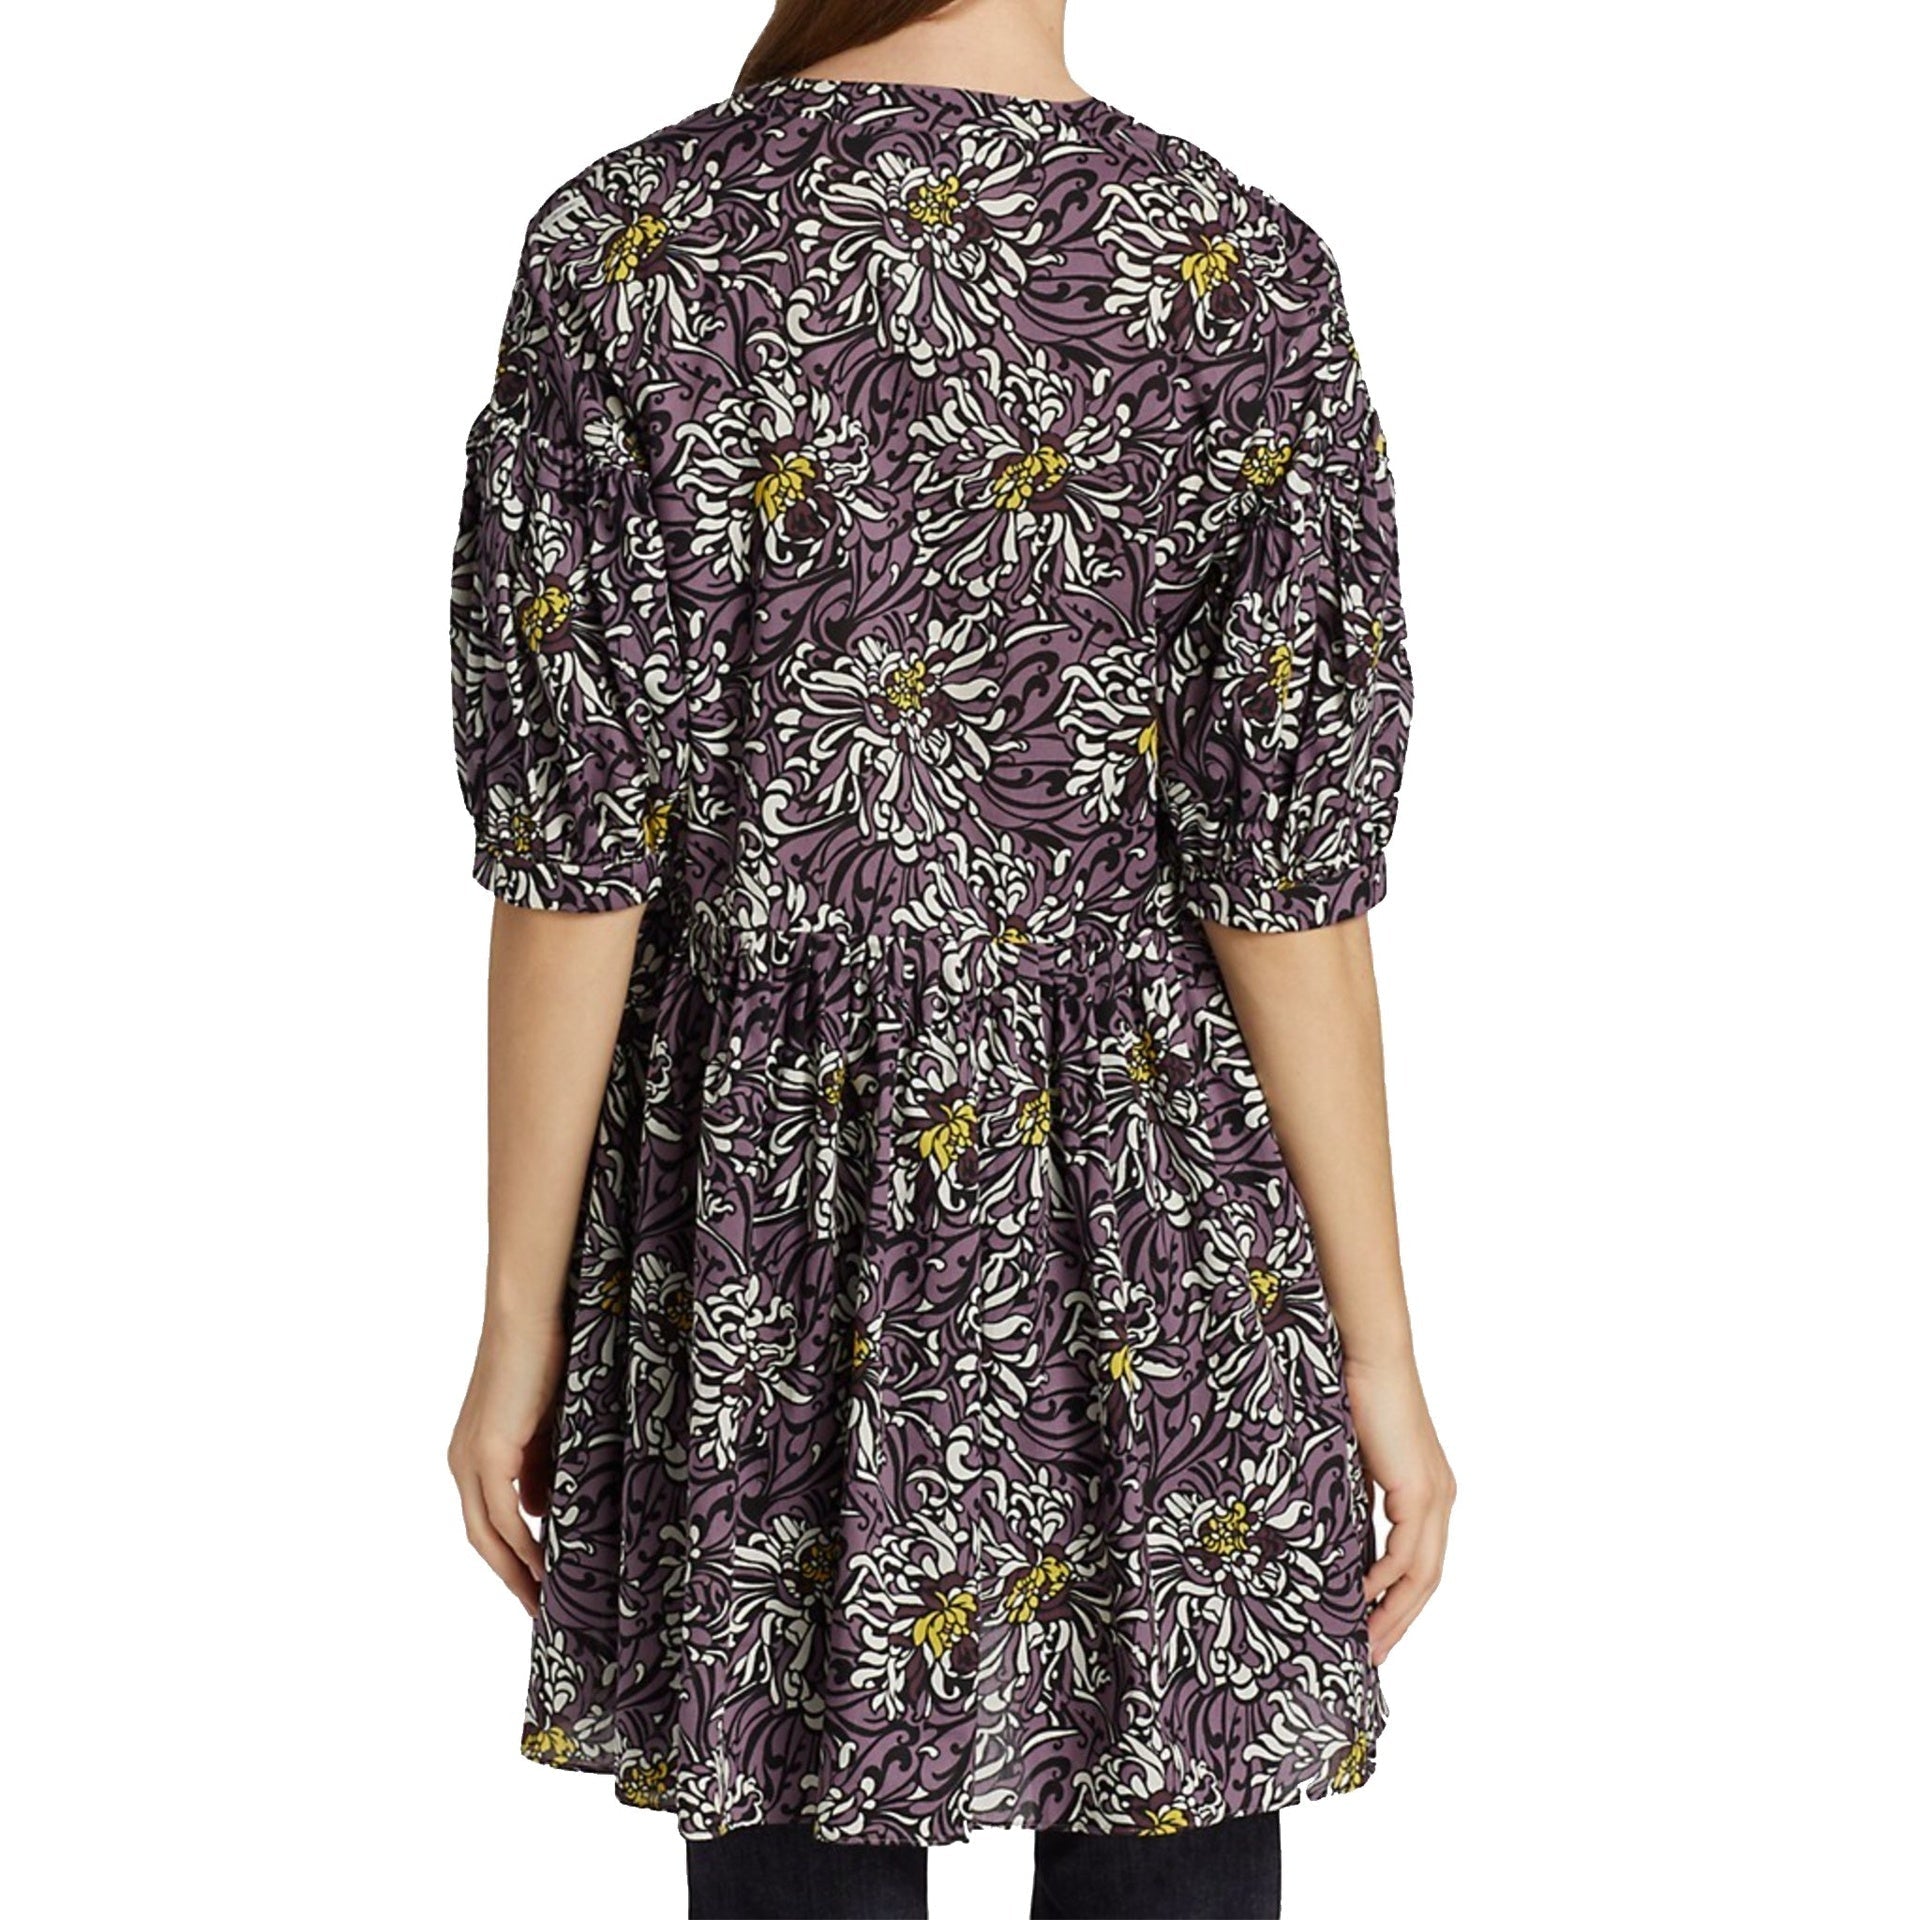 S-MAX-MARA-OUTLET-SALE-s-Max-Mara-Balenio-Floral-Longline-Blouse-WOMEN-CLOTHING-PURPLE-44-ARCHIVE-COLLECTION-3.jpg